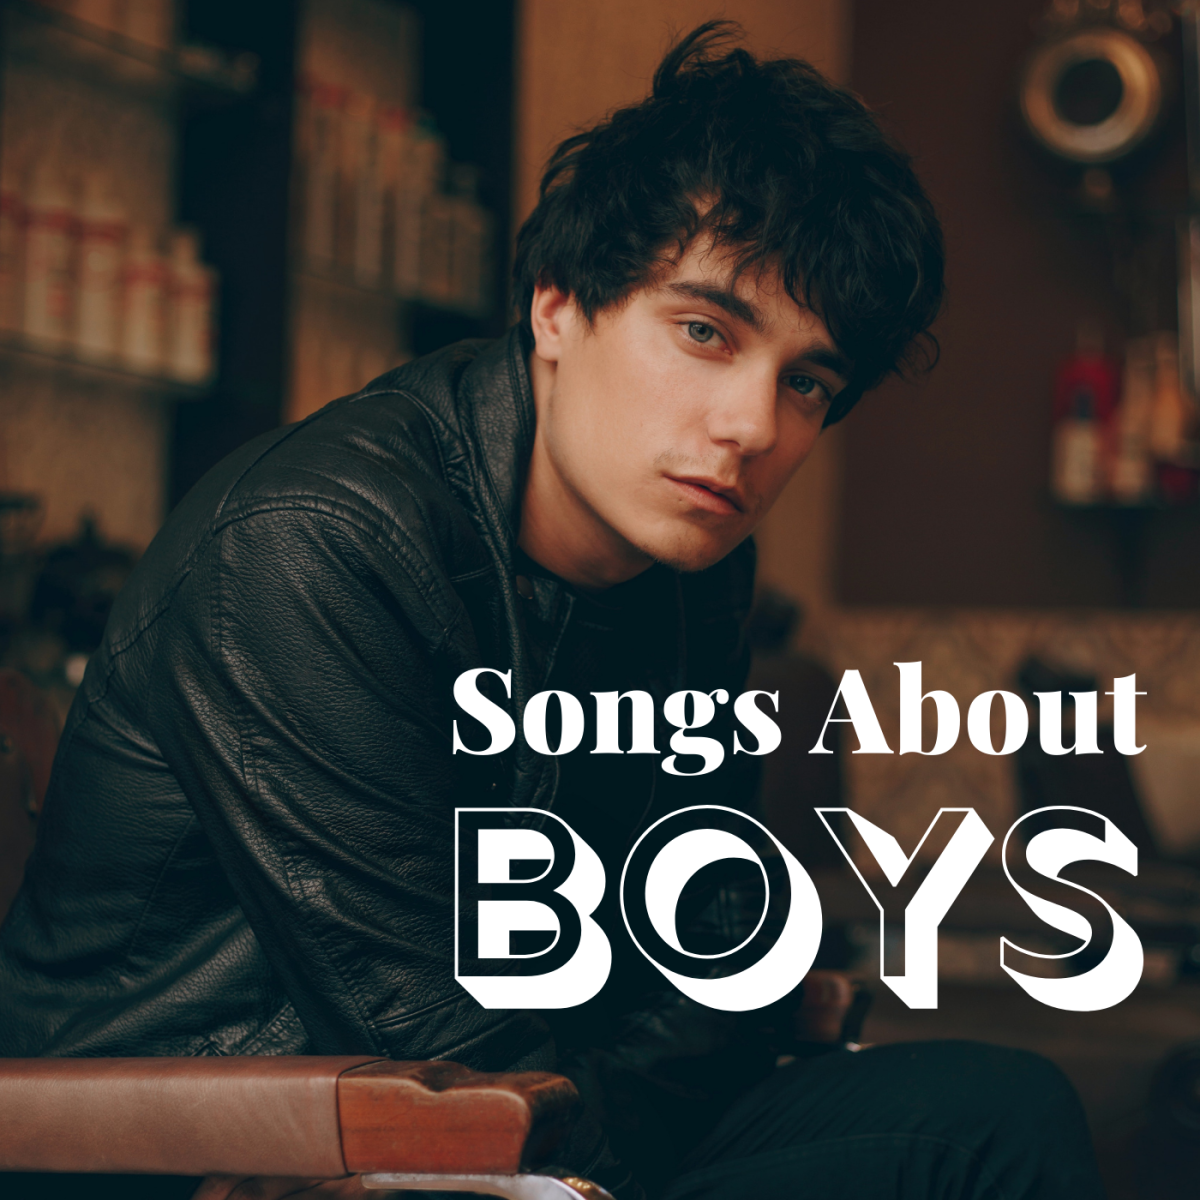 Discover 100 songs with the word "boy" in the title for your playlist or mix.